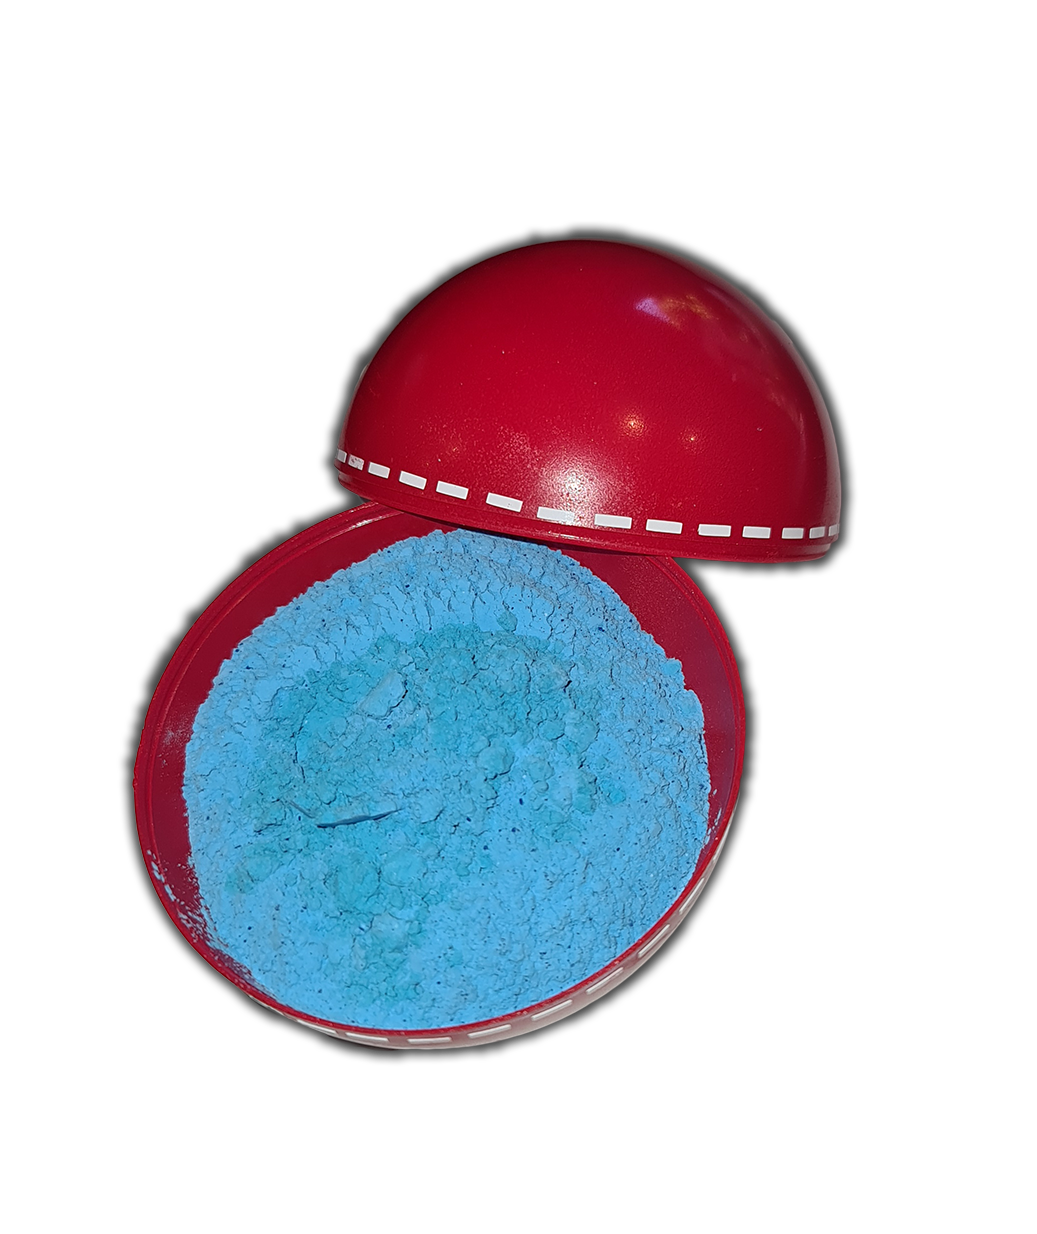 Gender reveal cricket ball filled with vibrant blue powder